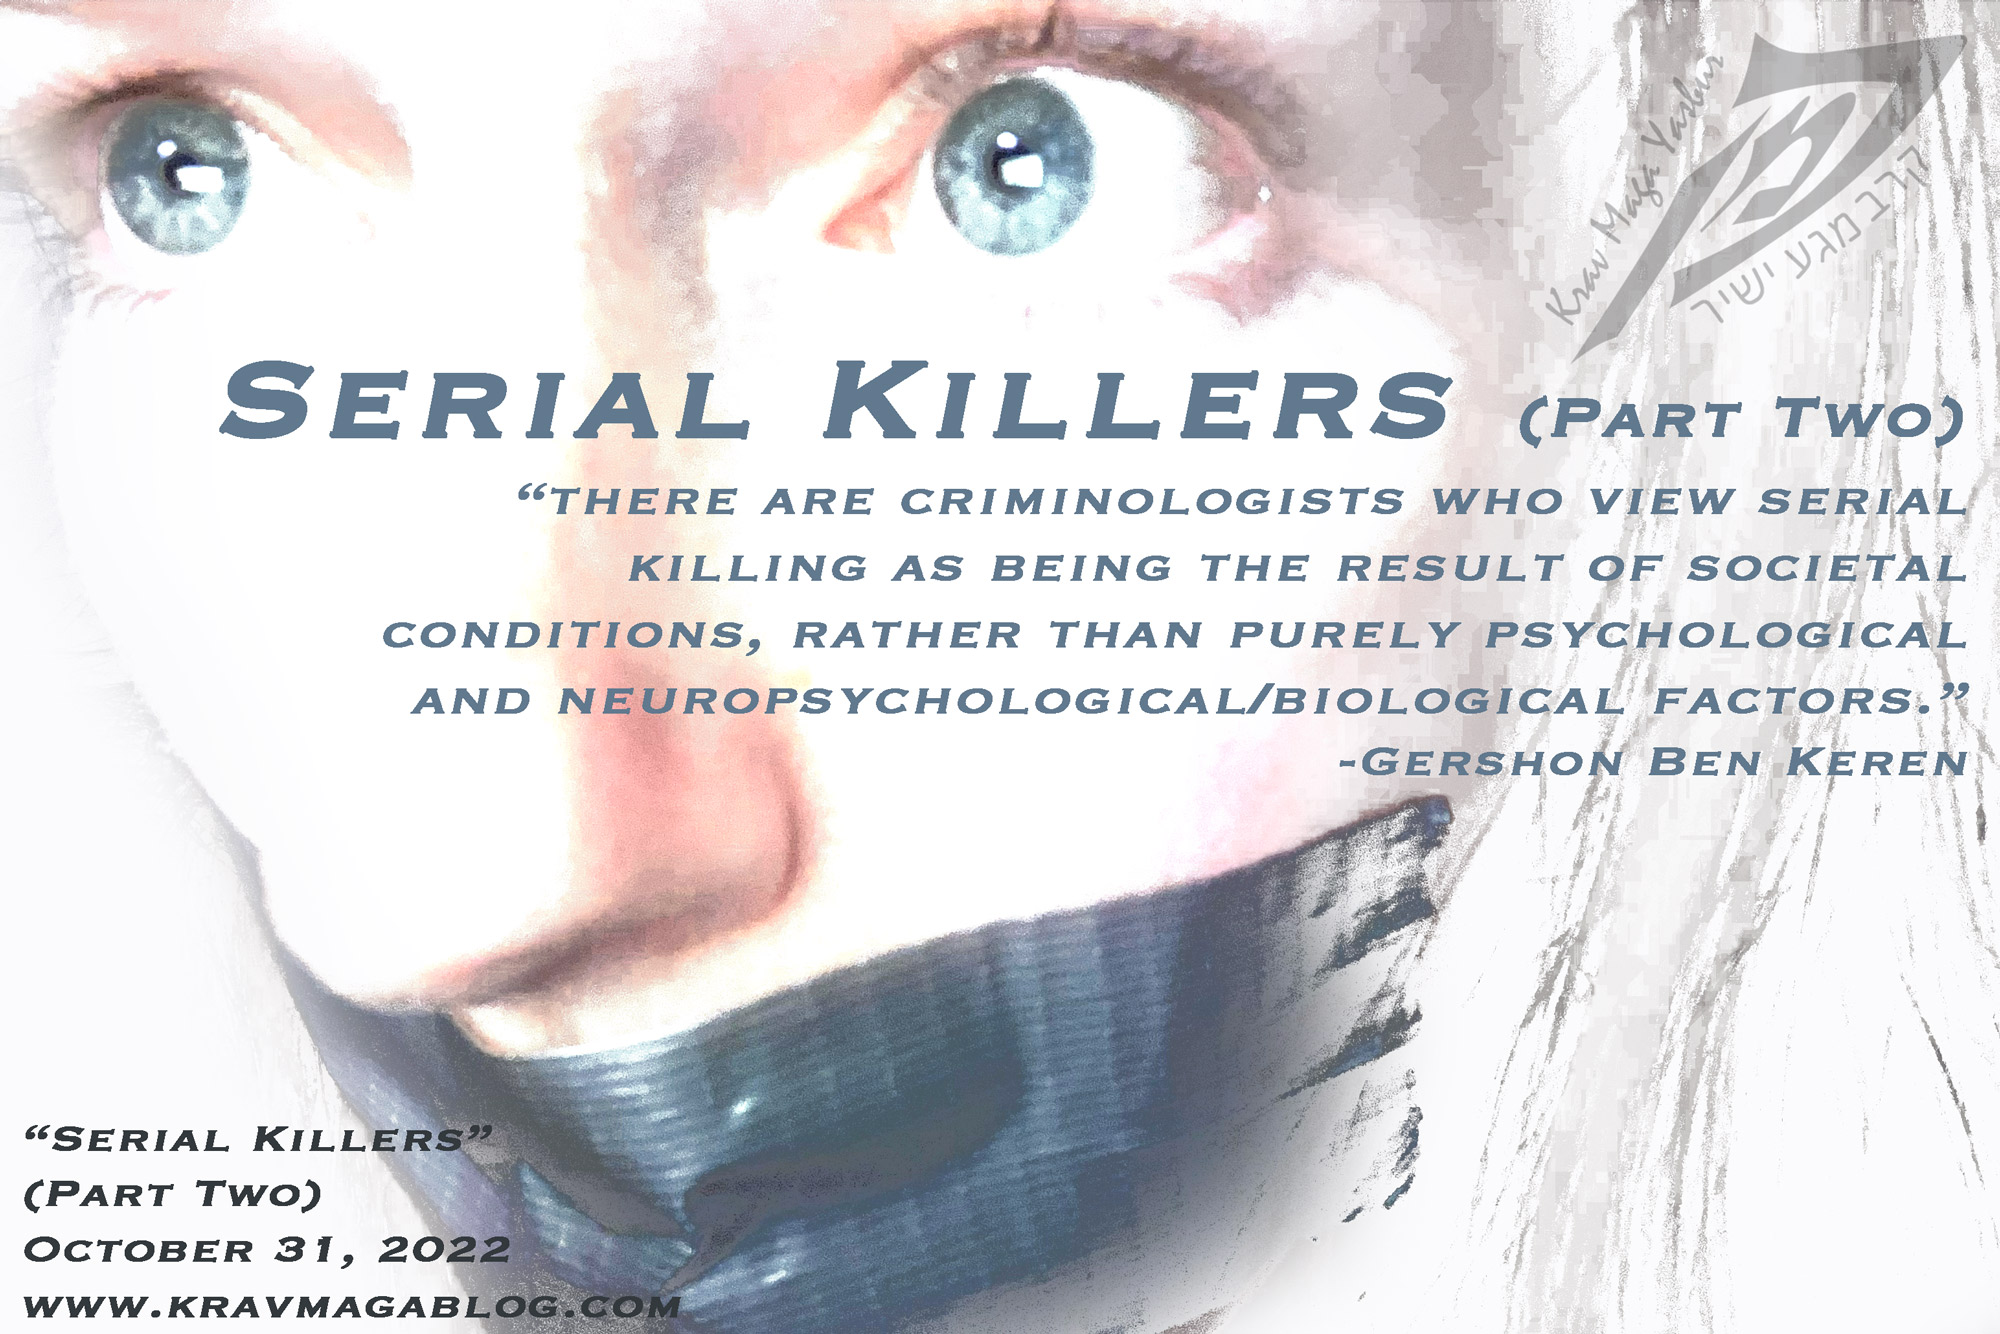 Blog About Serial Killers - Part Two